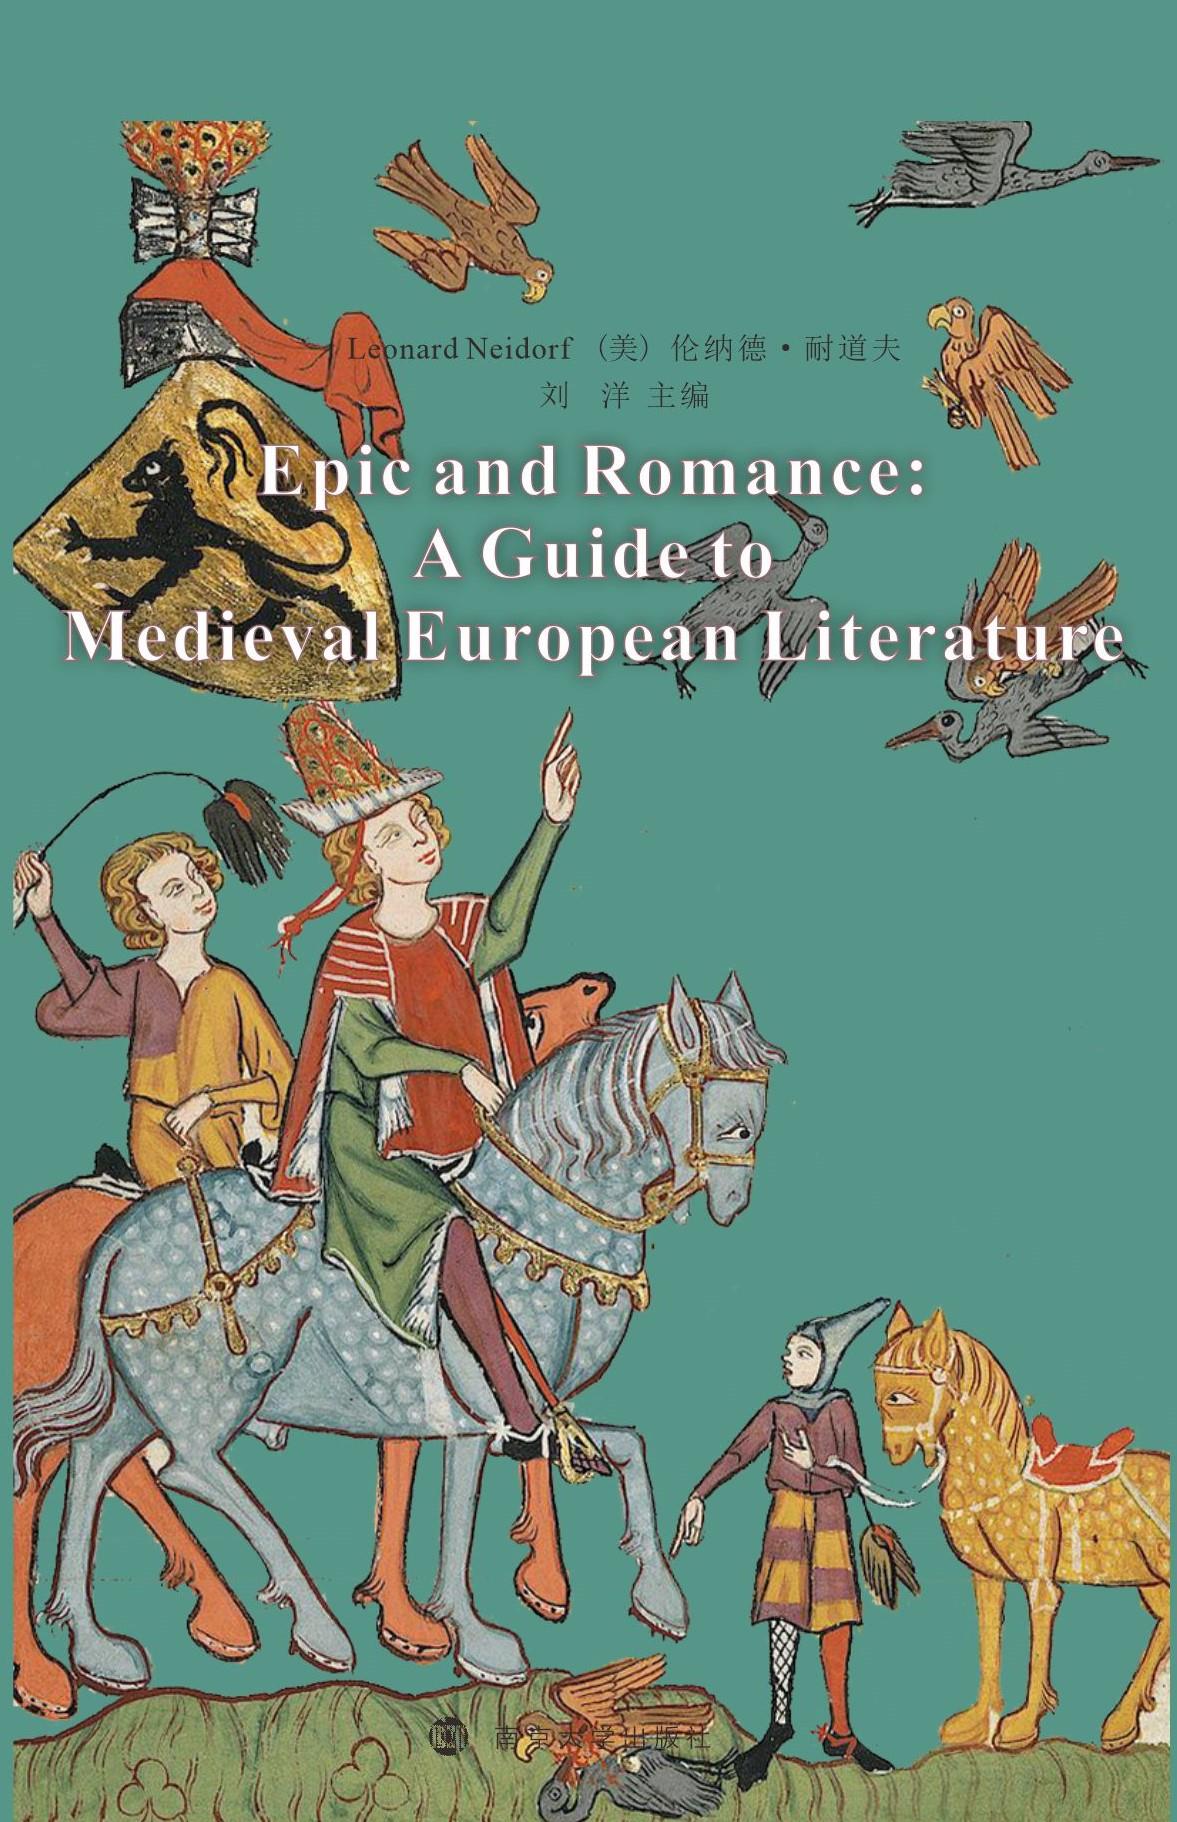 Epic and Romance: A Guide to Medieval European Literature